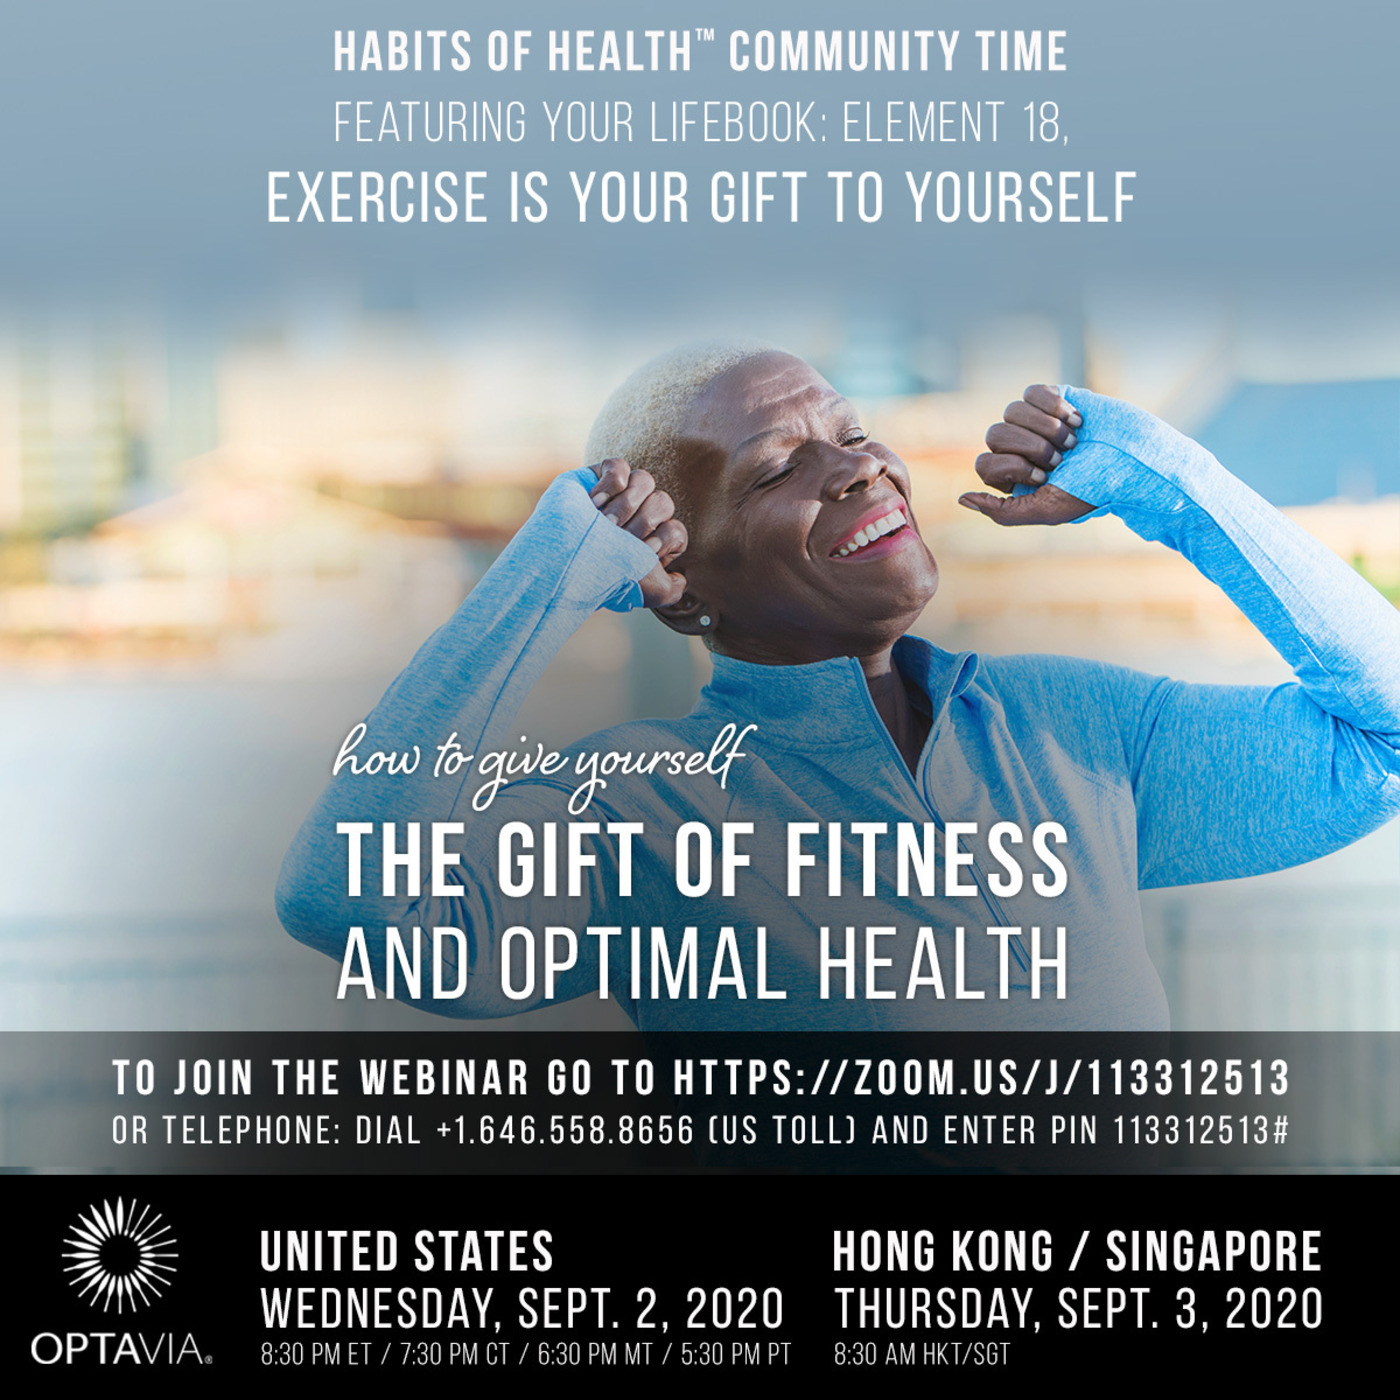 Your LifeBook, Element 18: Exercise is Your Gift to Yourself